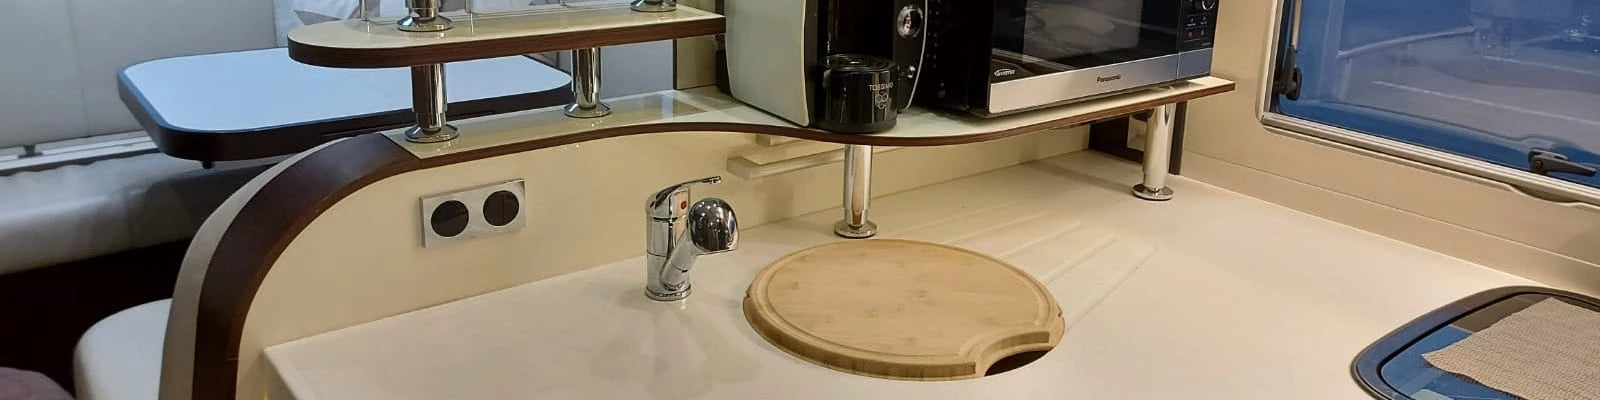 Sink covers for motorhomes